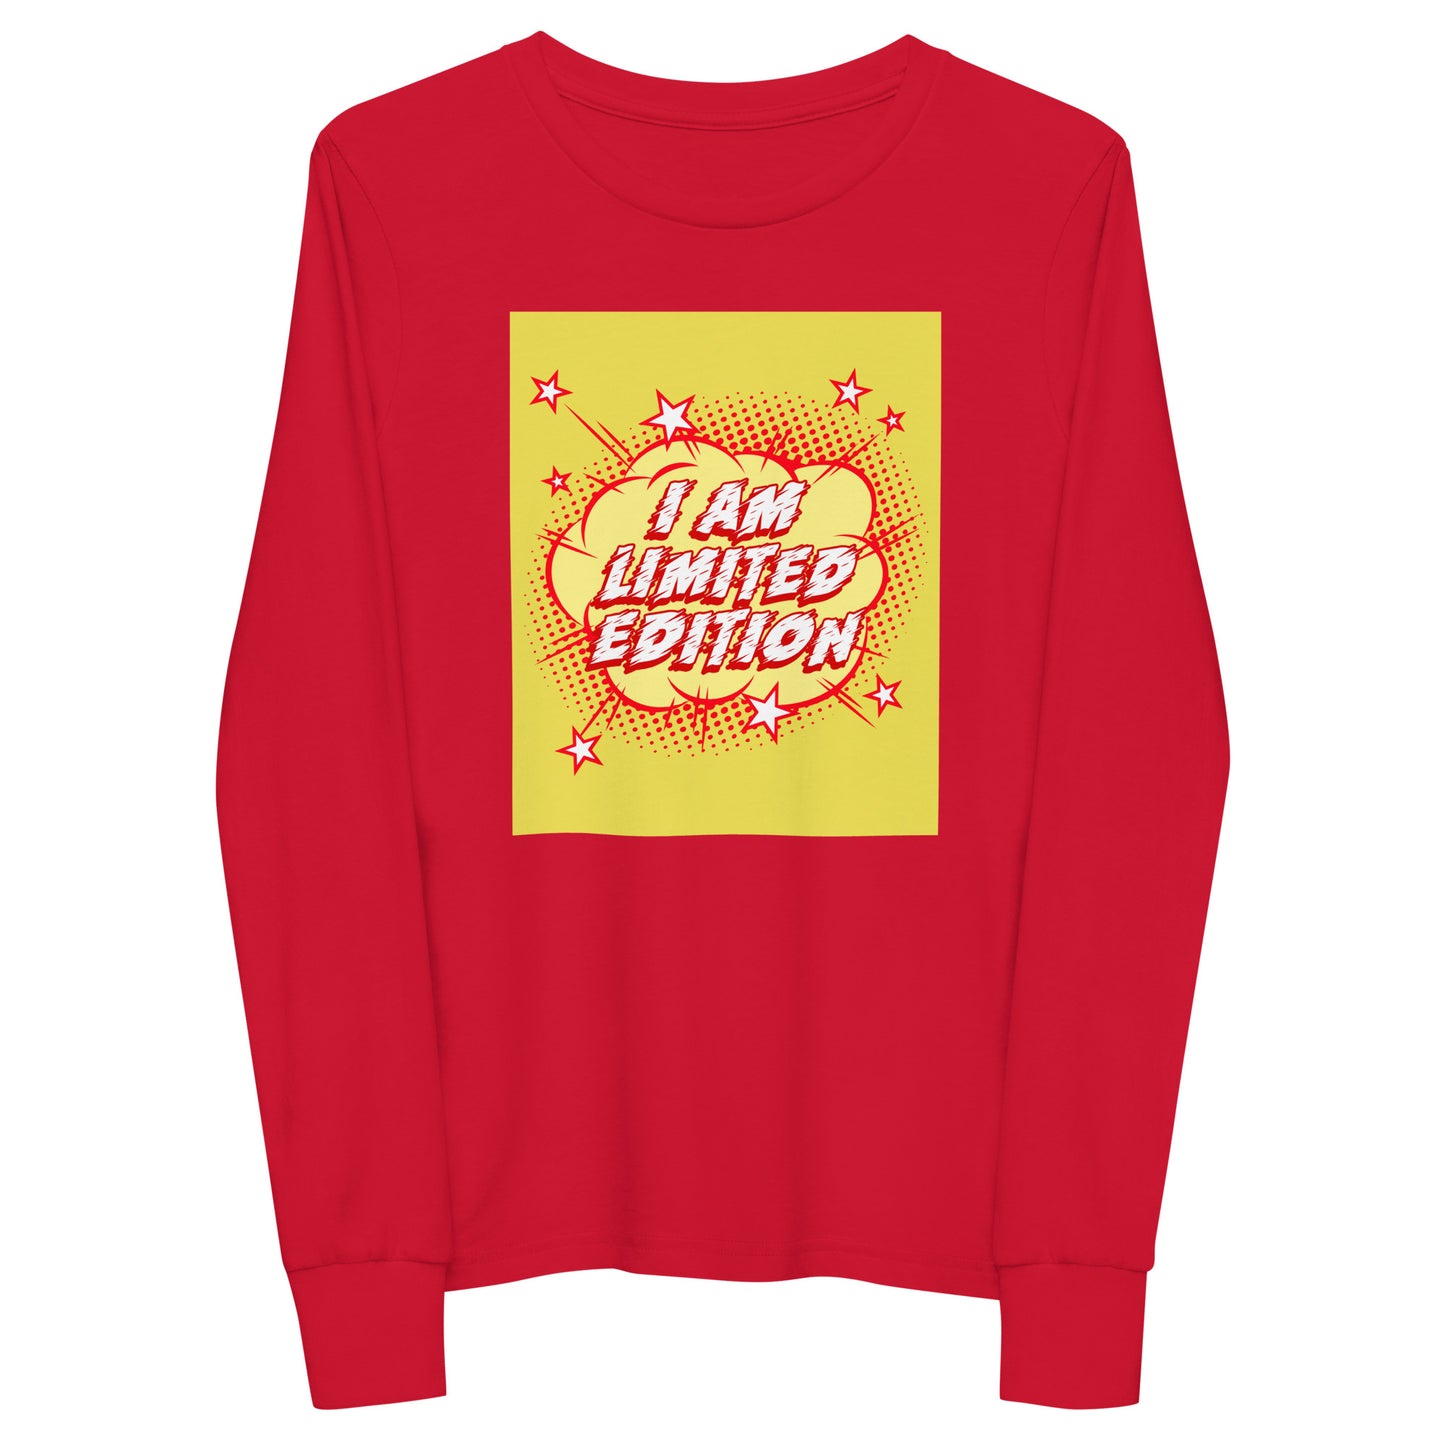 Kids Youth long sleeve tee in Limited Edition